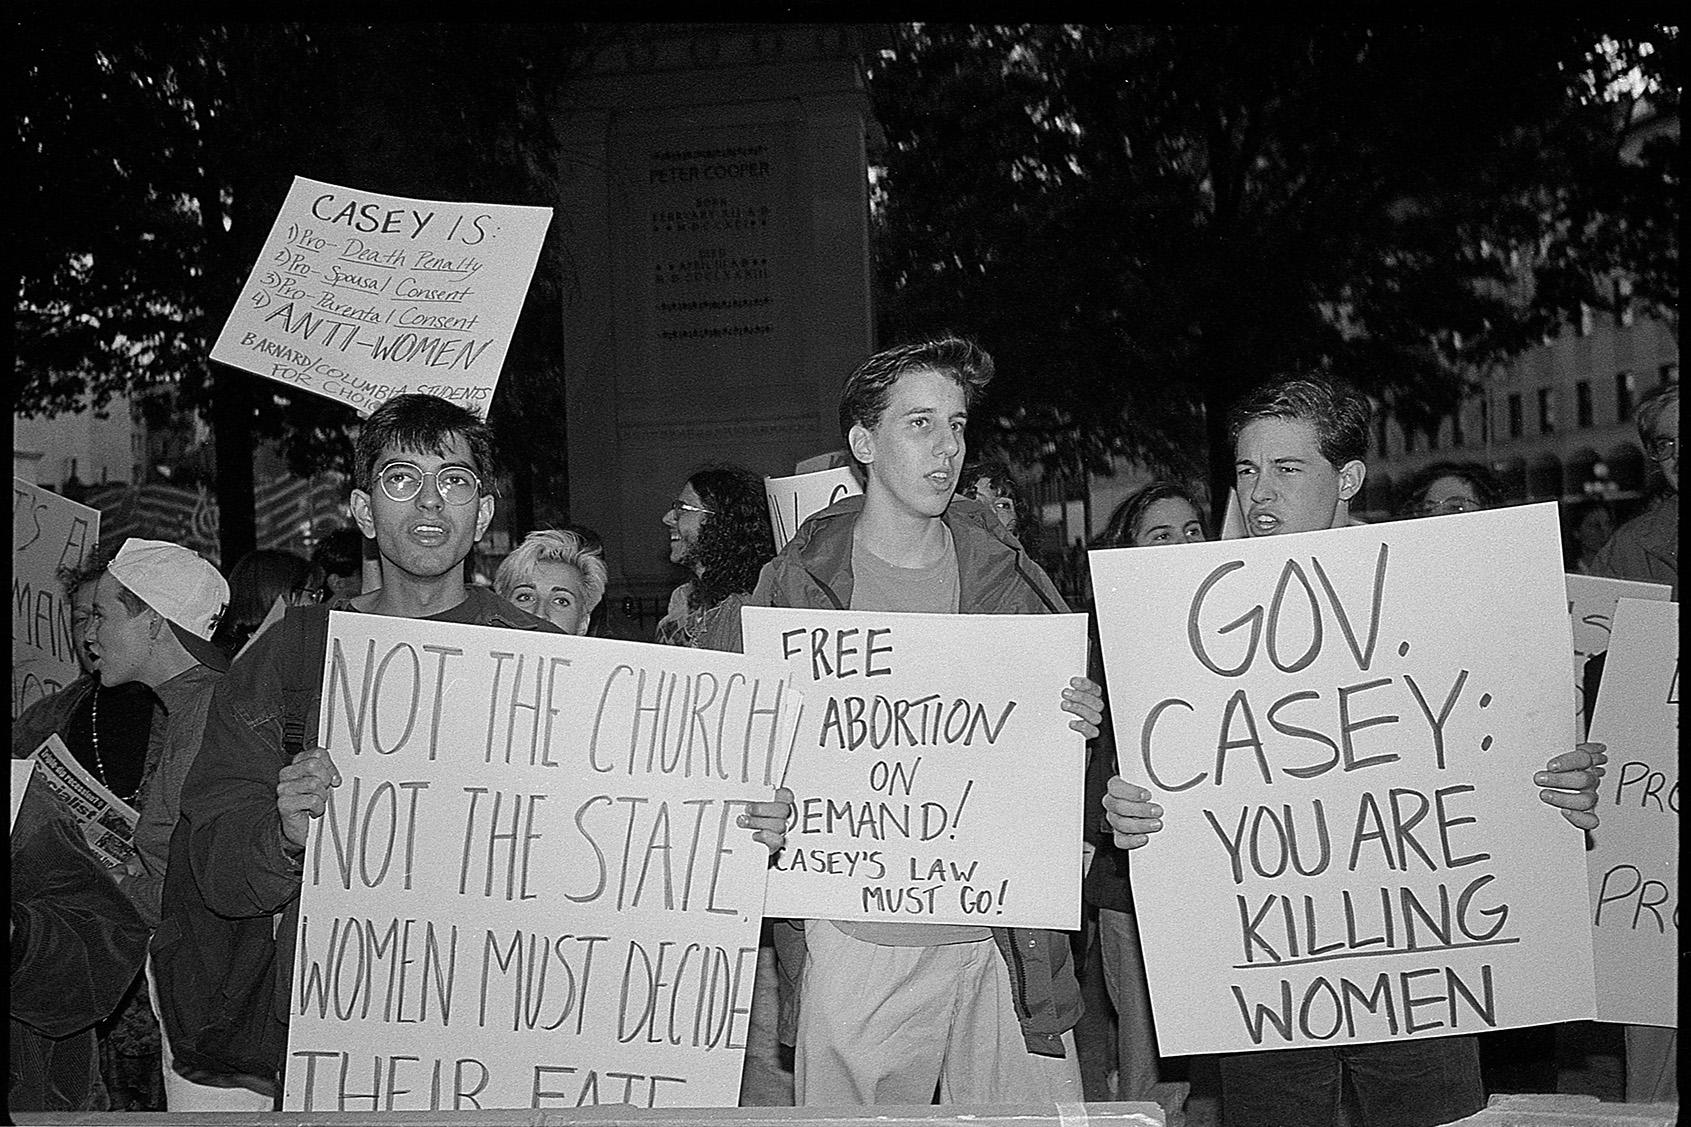 Students for Choice Cooper Union, New York City, October 2, 1992.